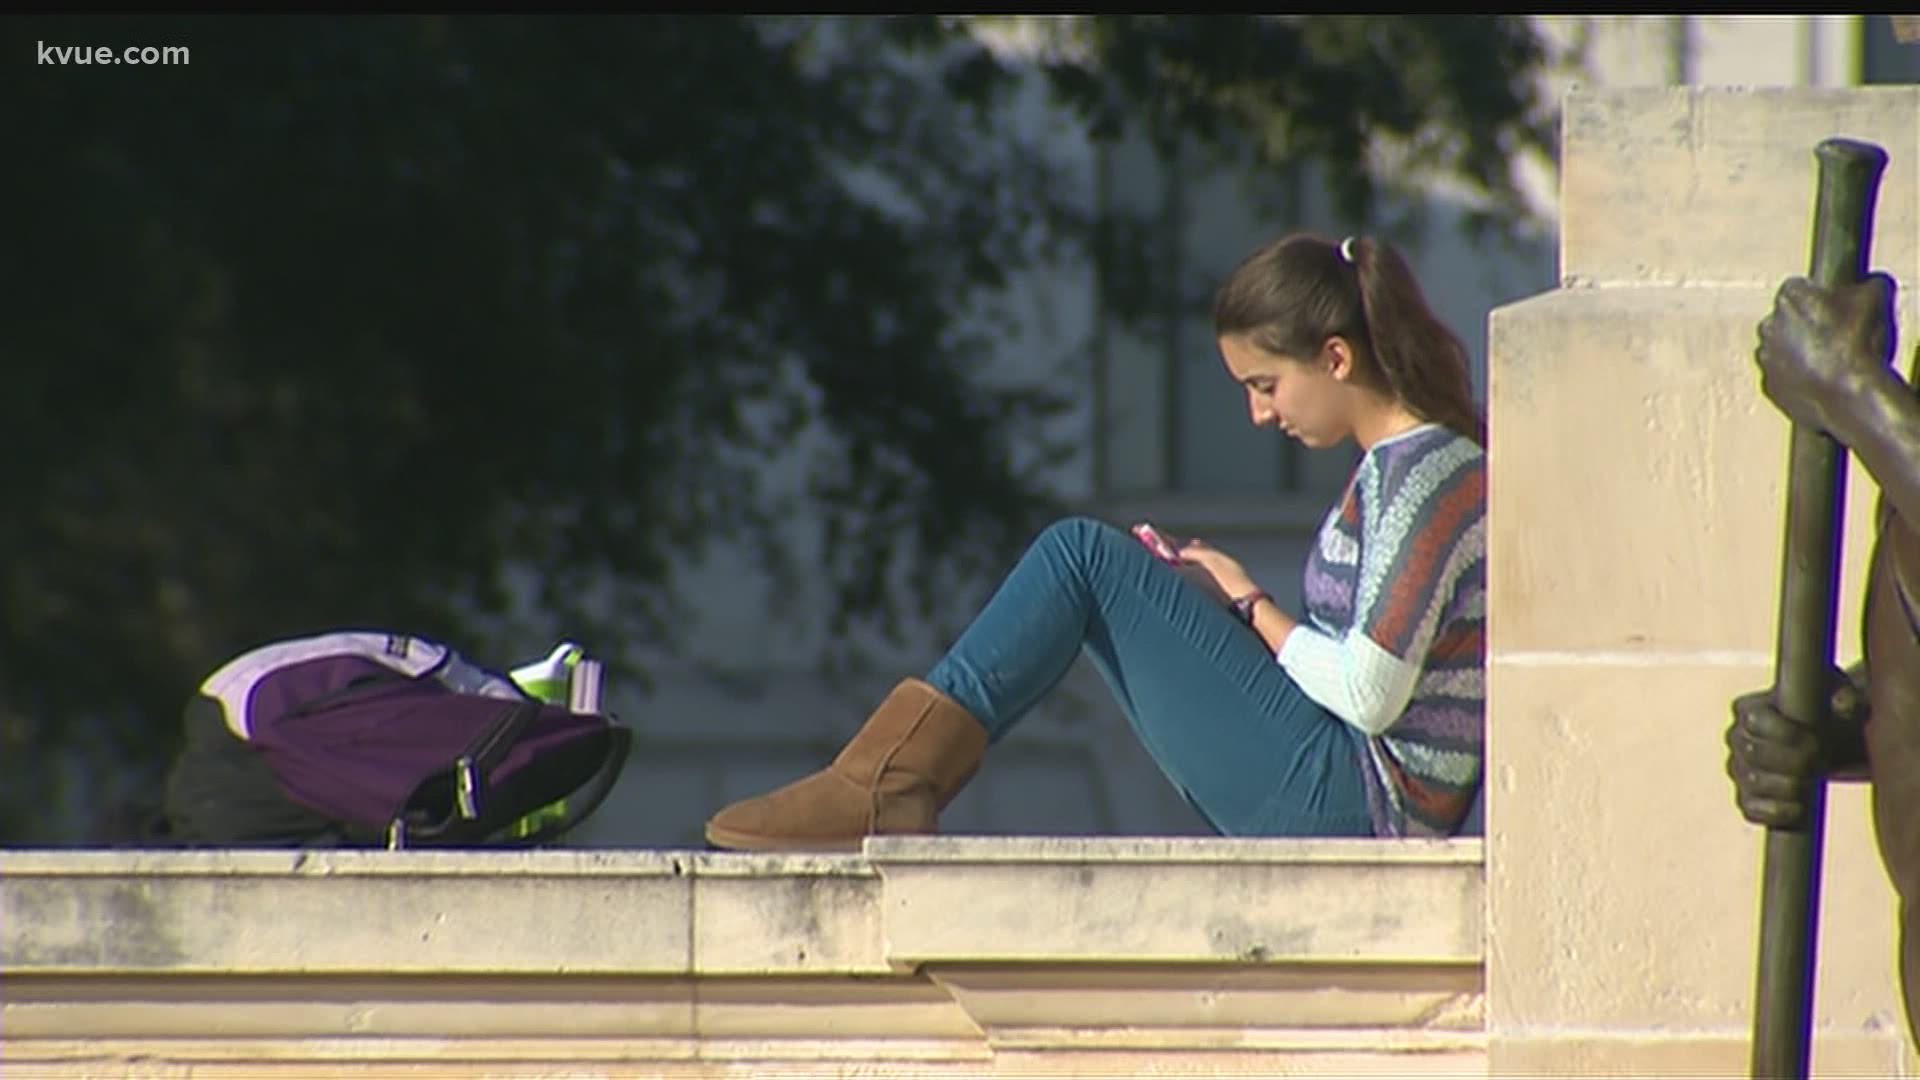 A new study ranks UT Austin No. 33 out of 2,000 universities in the world.